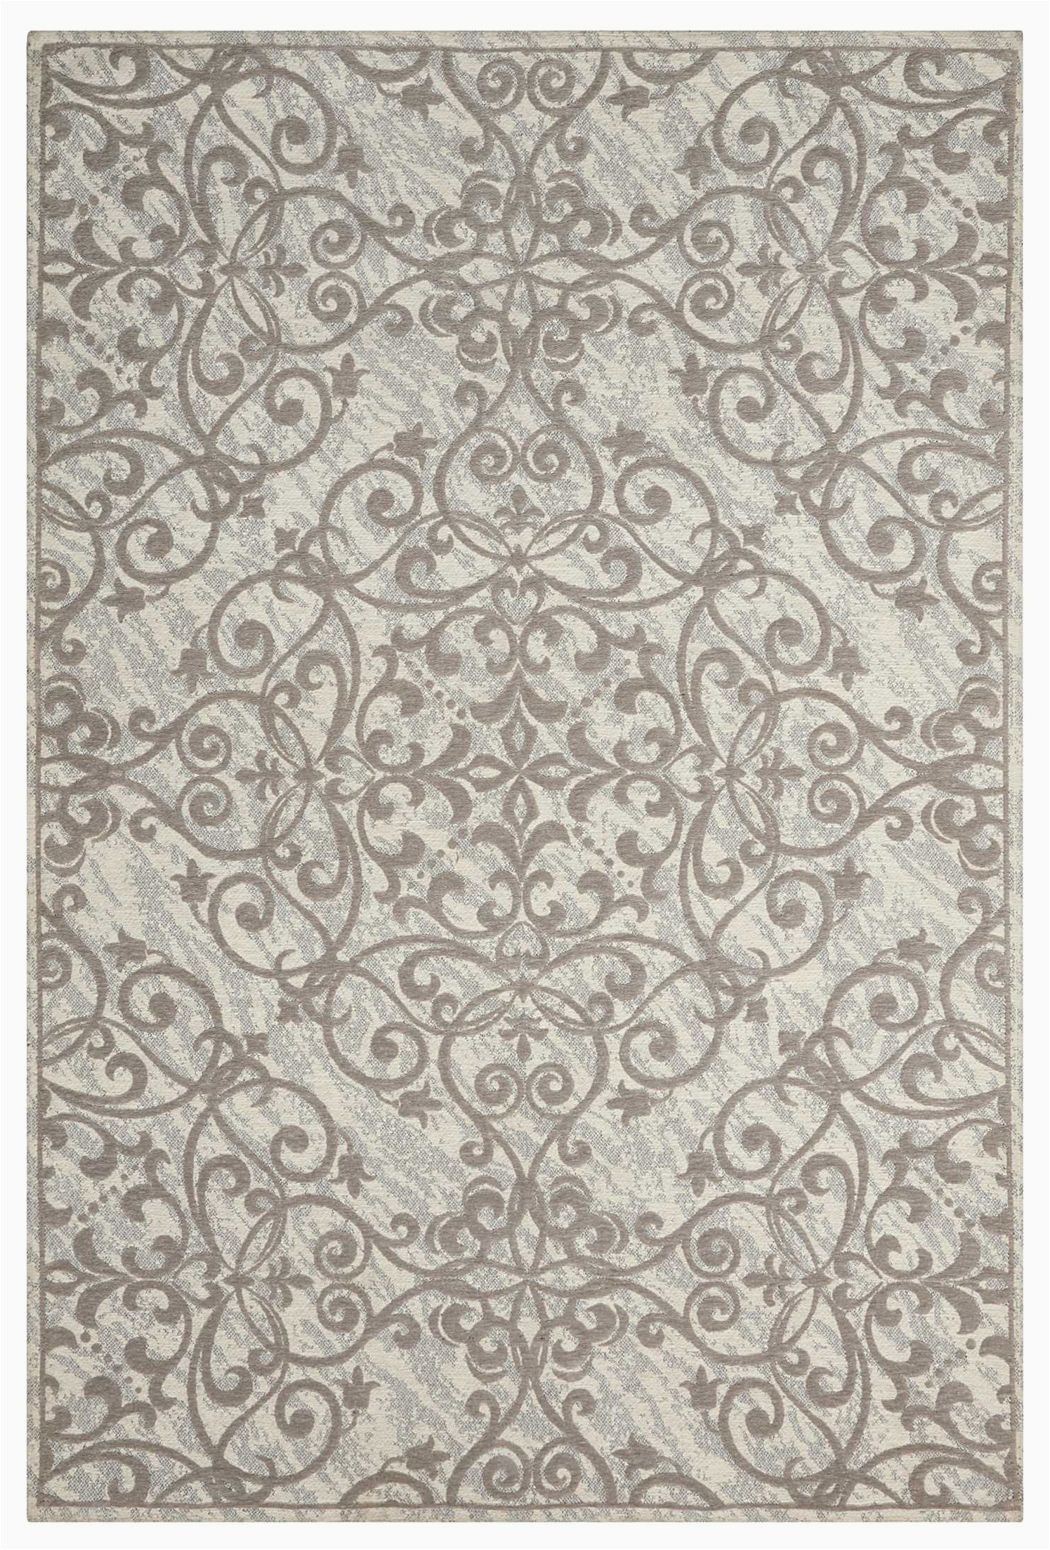 At Home Store area Rugs Home Accents Damask 8 X 10 Rug Gray Ivory